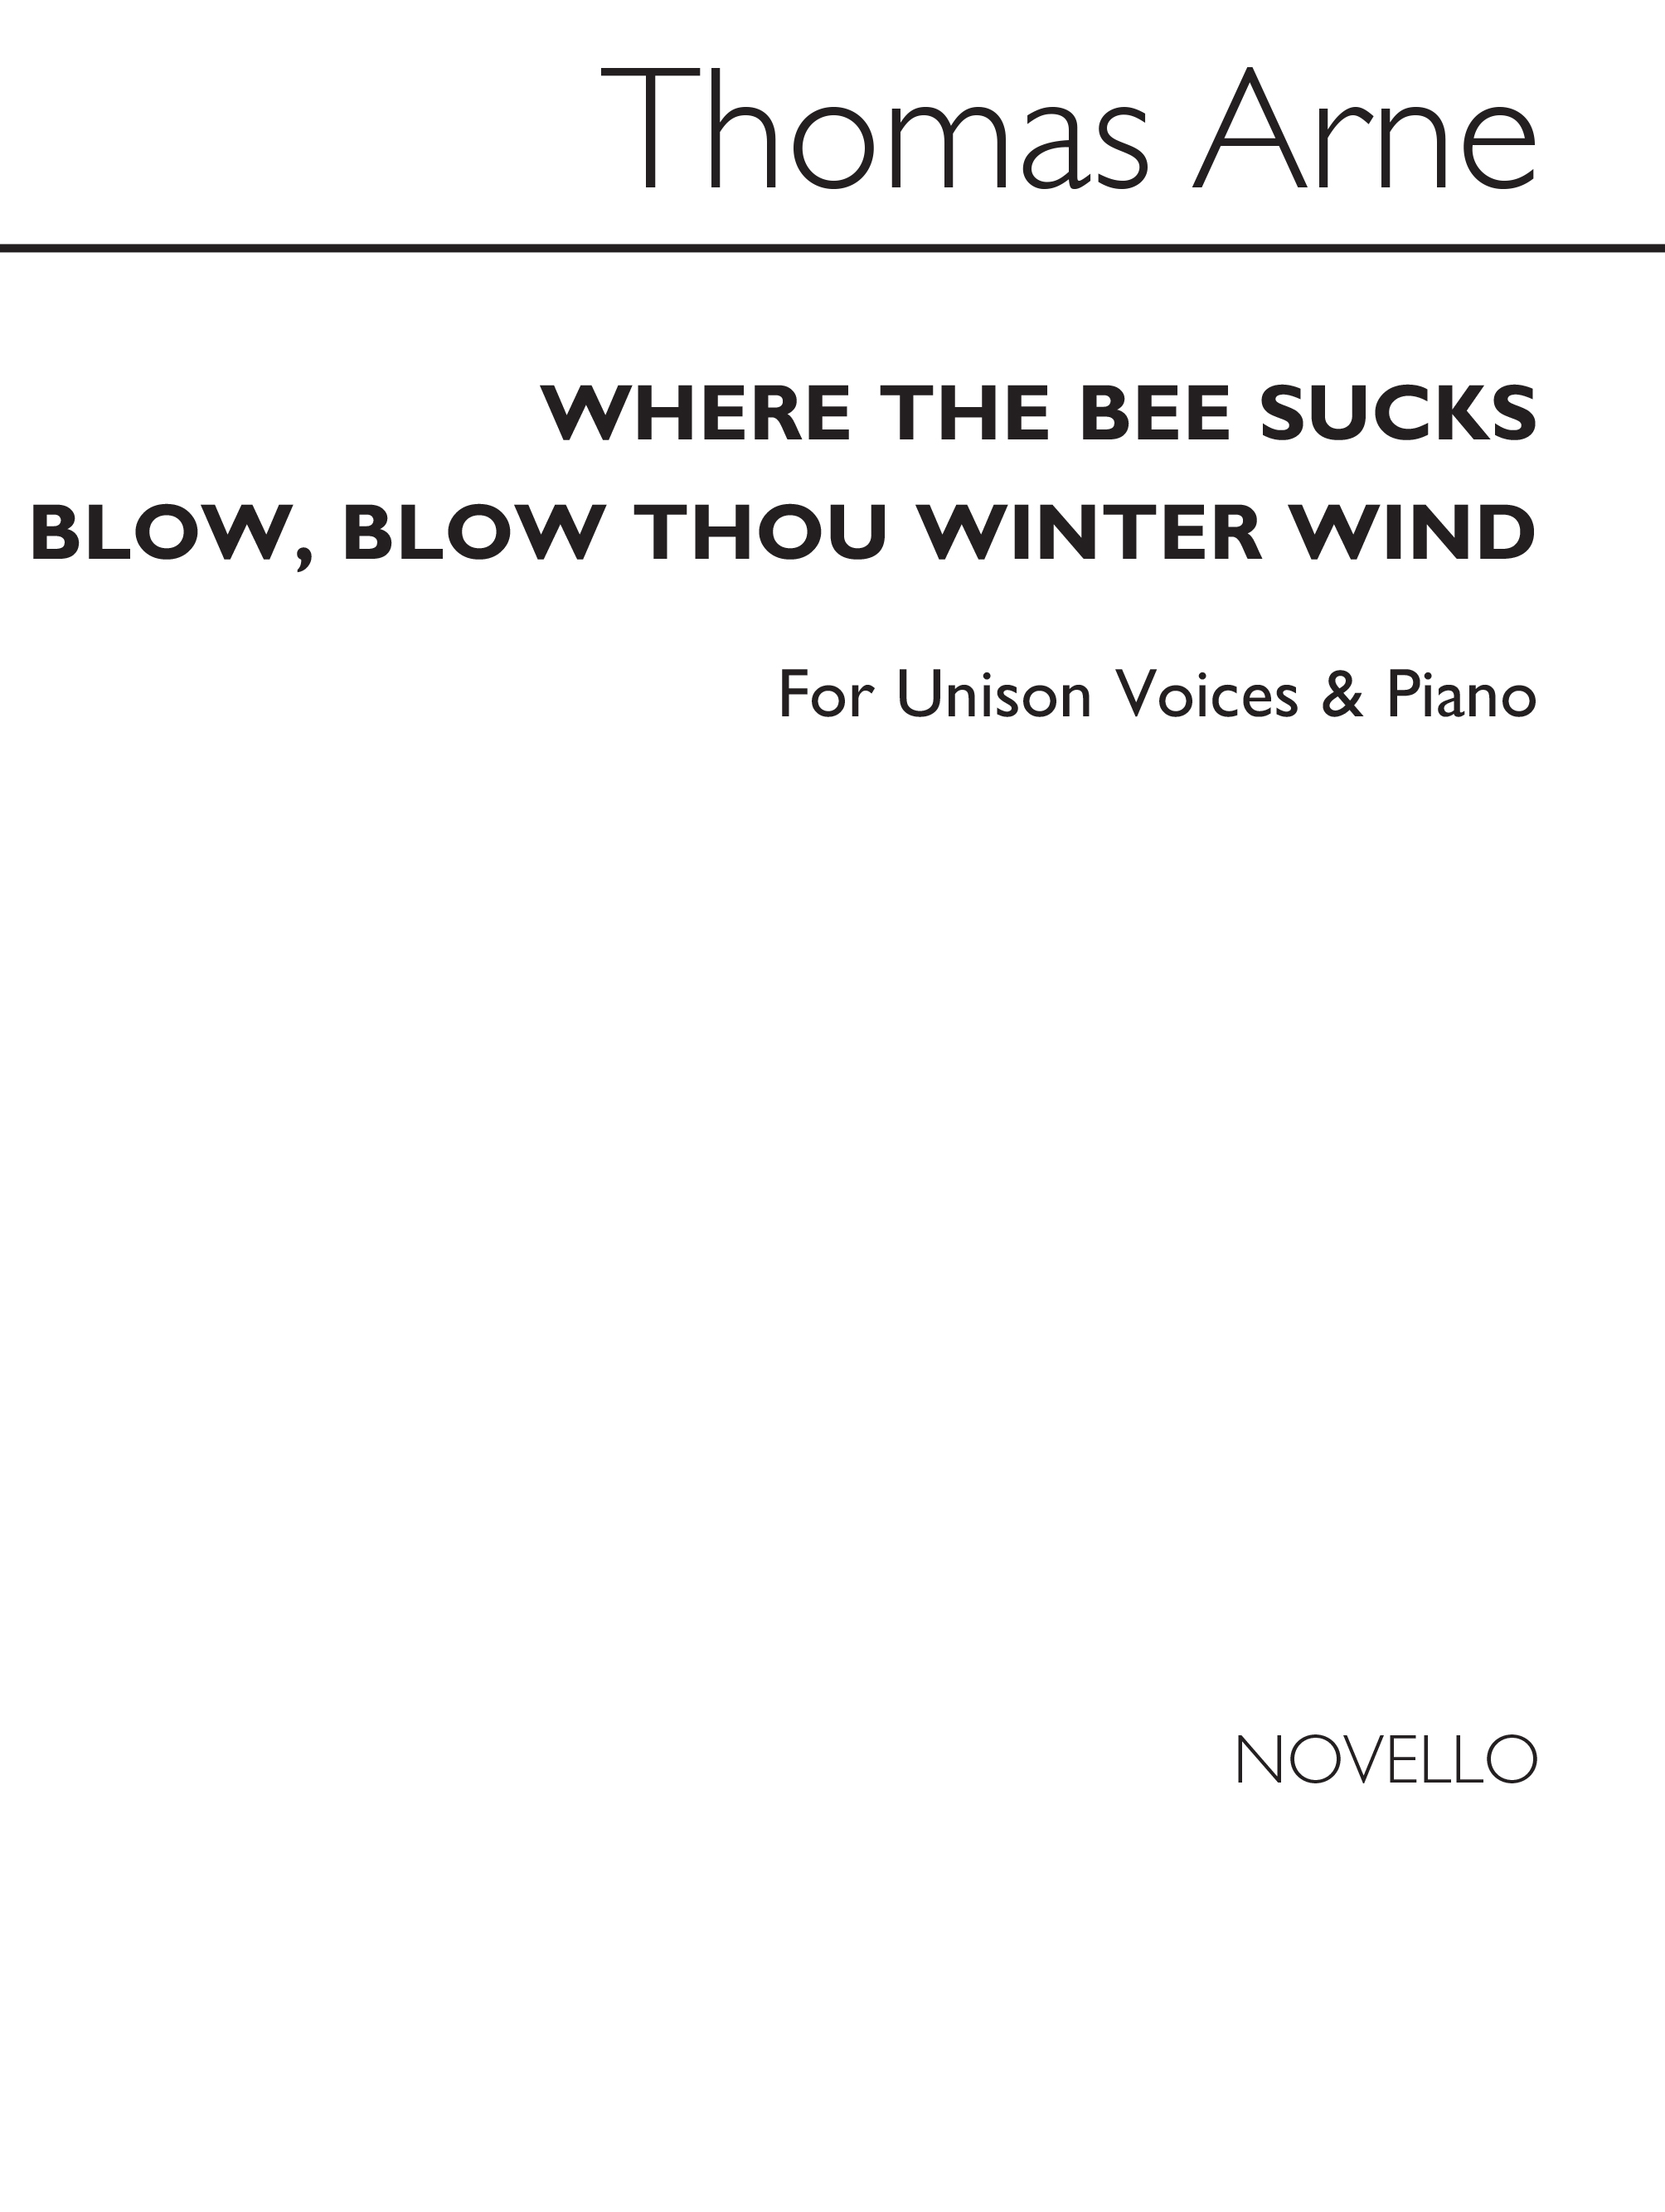 Where The Bee Sucks - Blow  Blow  Thou Winter Wind: Unison Voices: Single Sheet